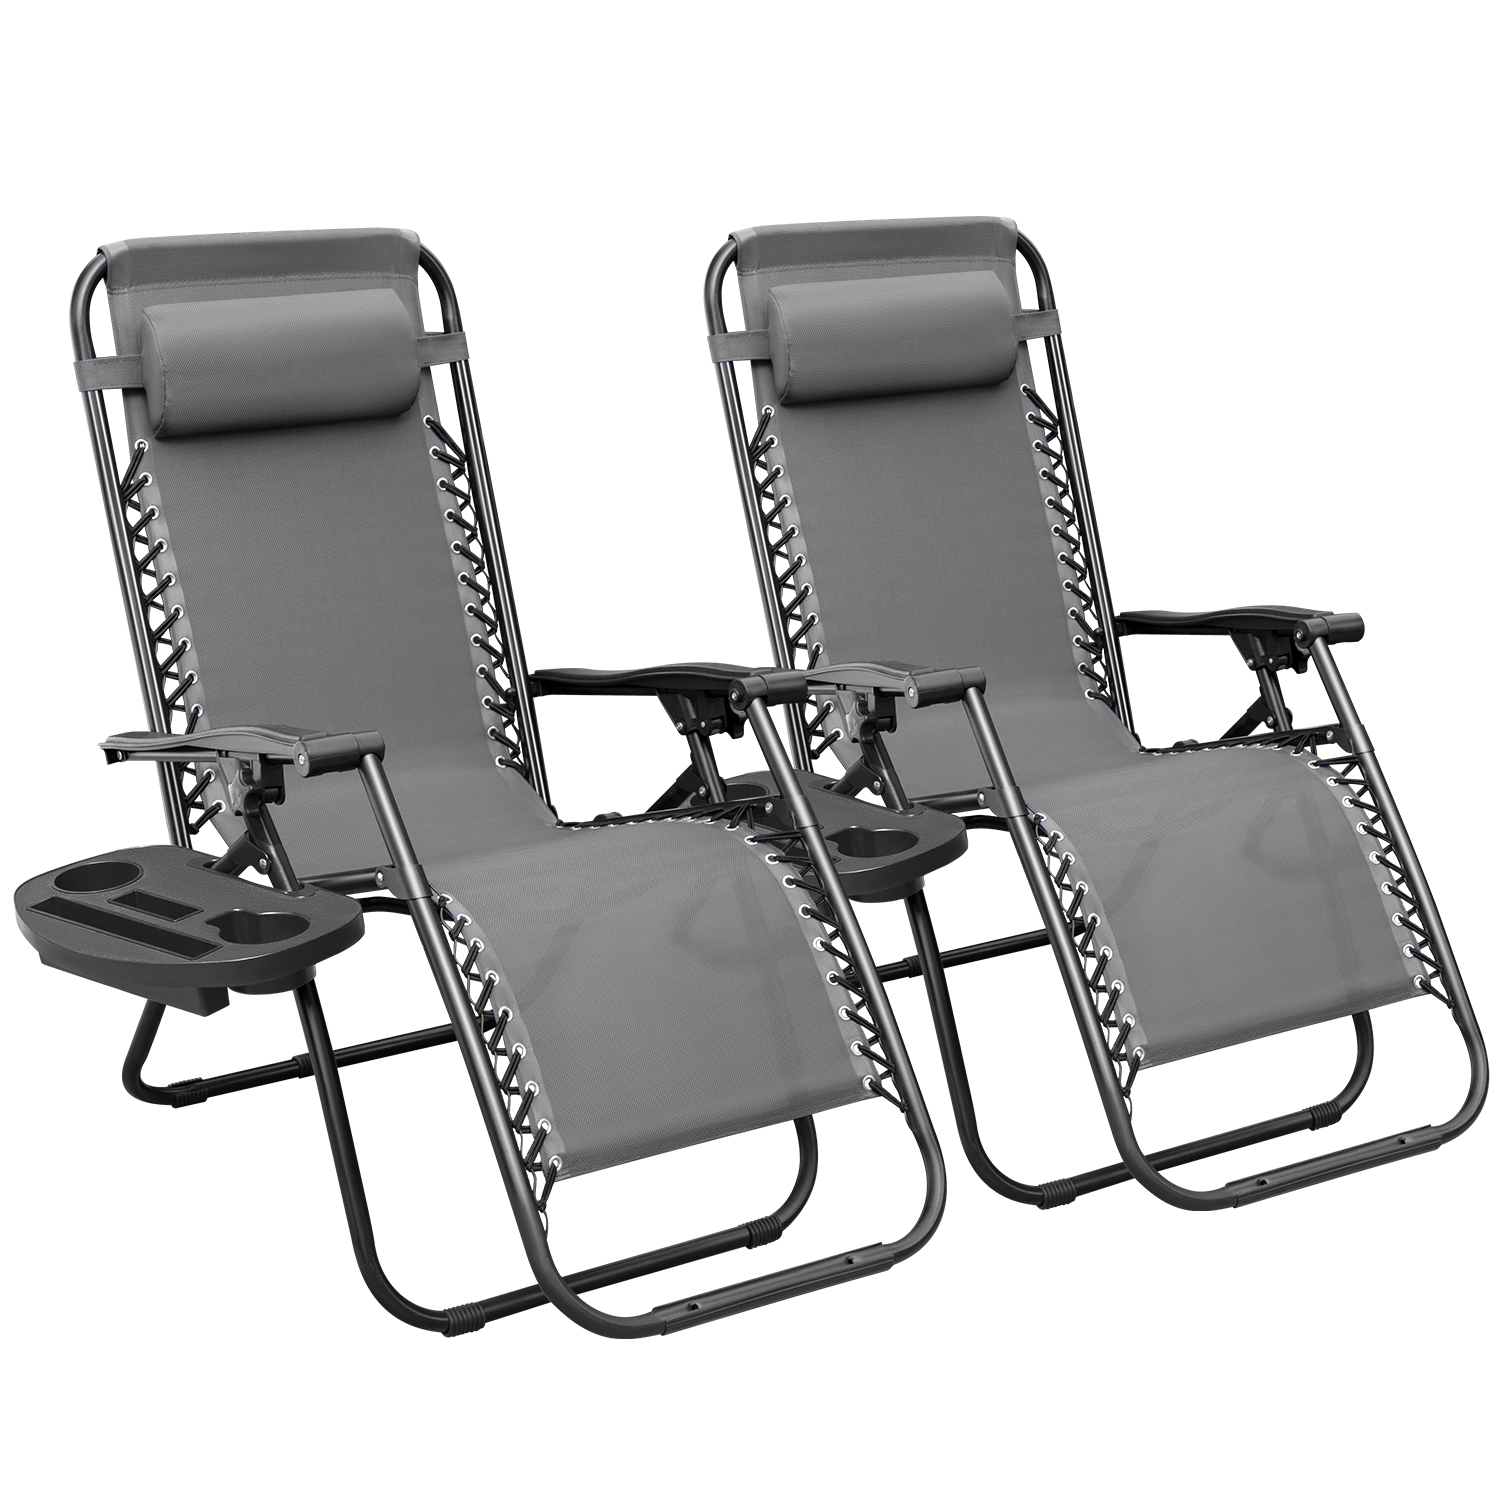 Lacoo Zero Gravity Reclining Outdoor Lounge Chair for 2 with Adjustable Pillow, 2 Pack, Gray - image 1 of 7